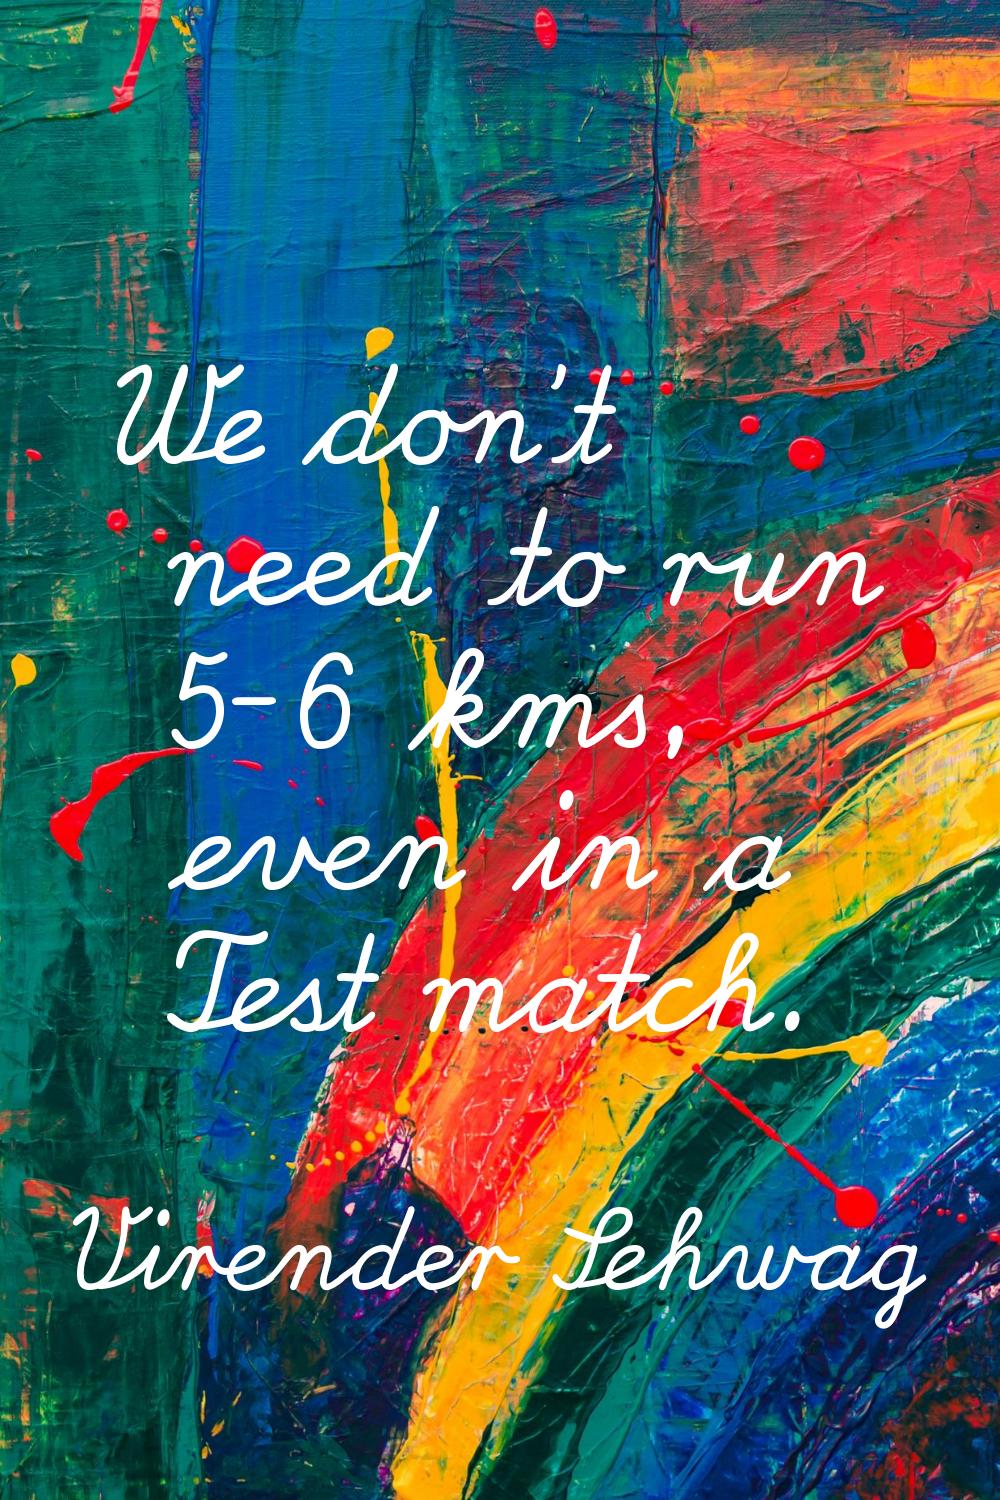 We don't need to run 5-6 kms, even in a Test match.